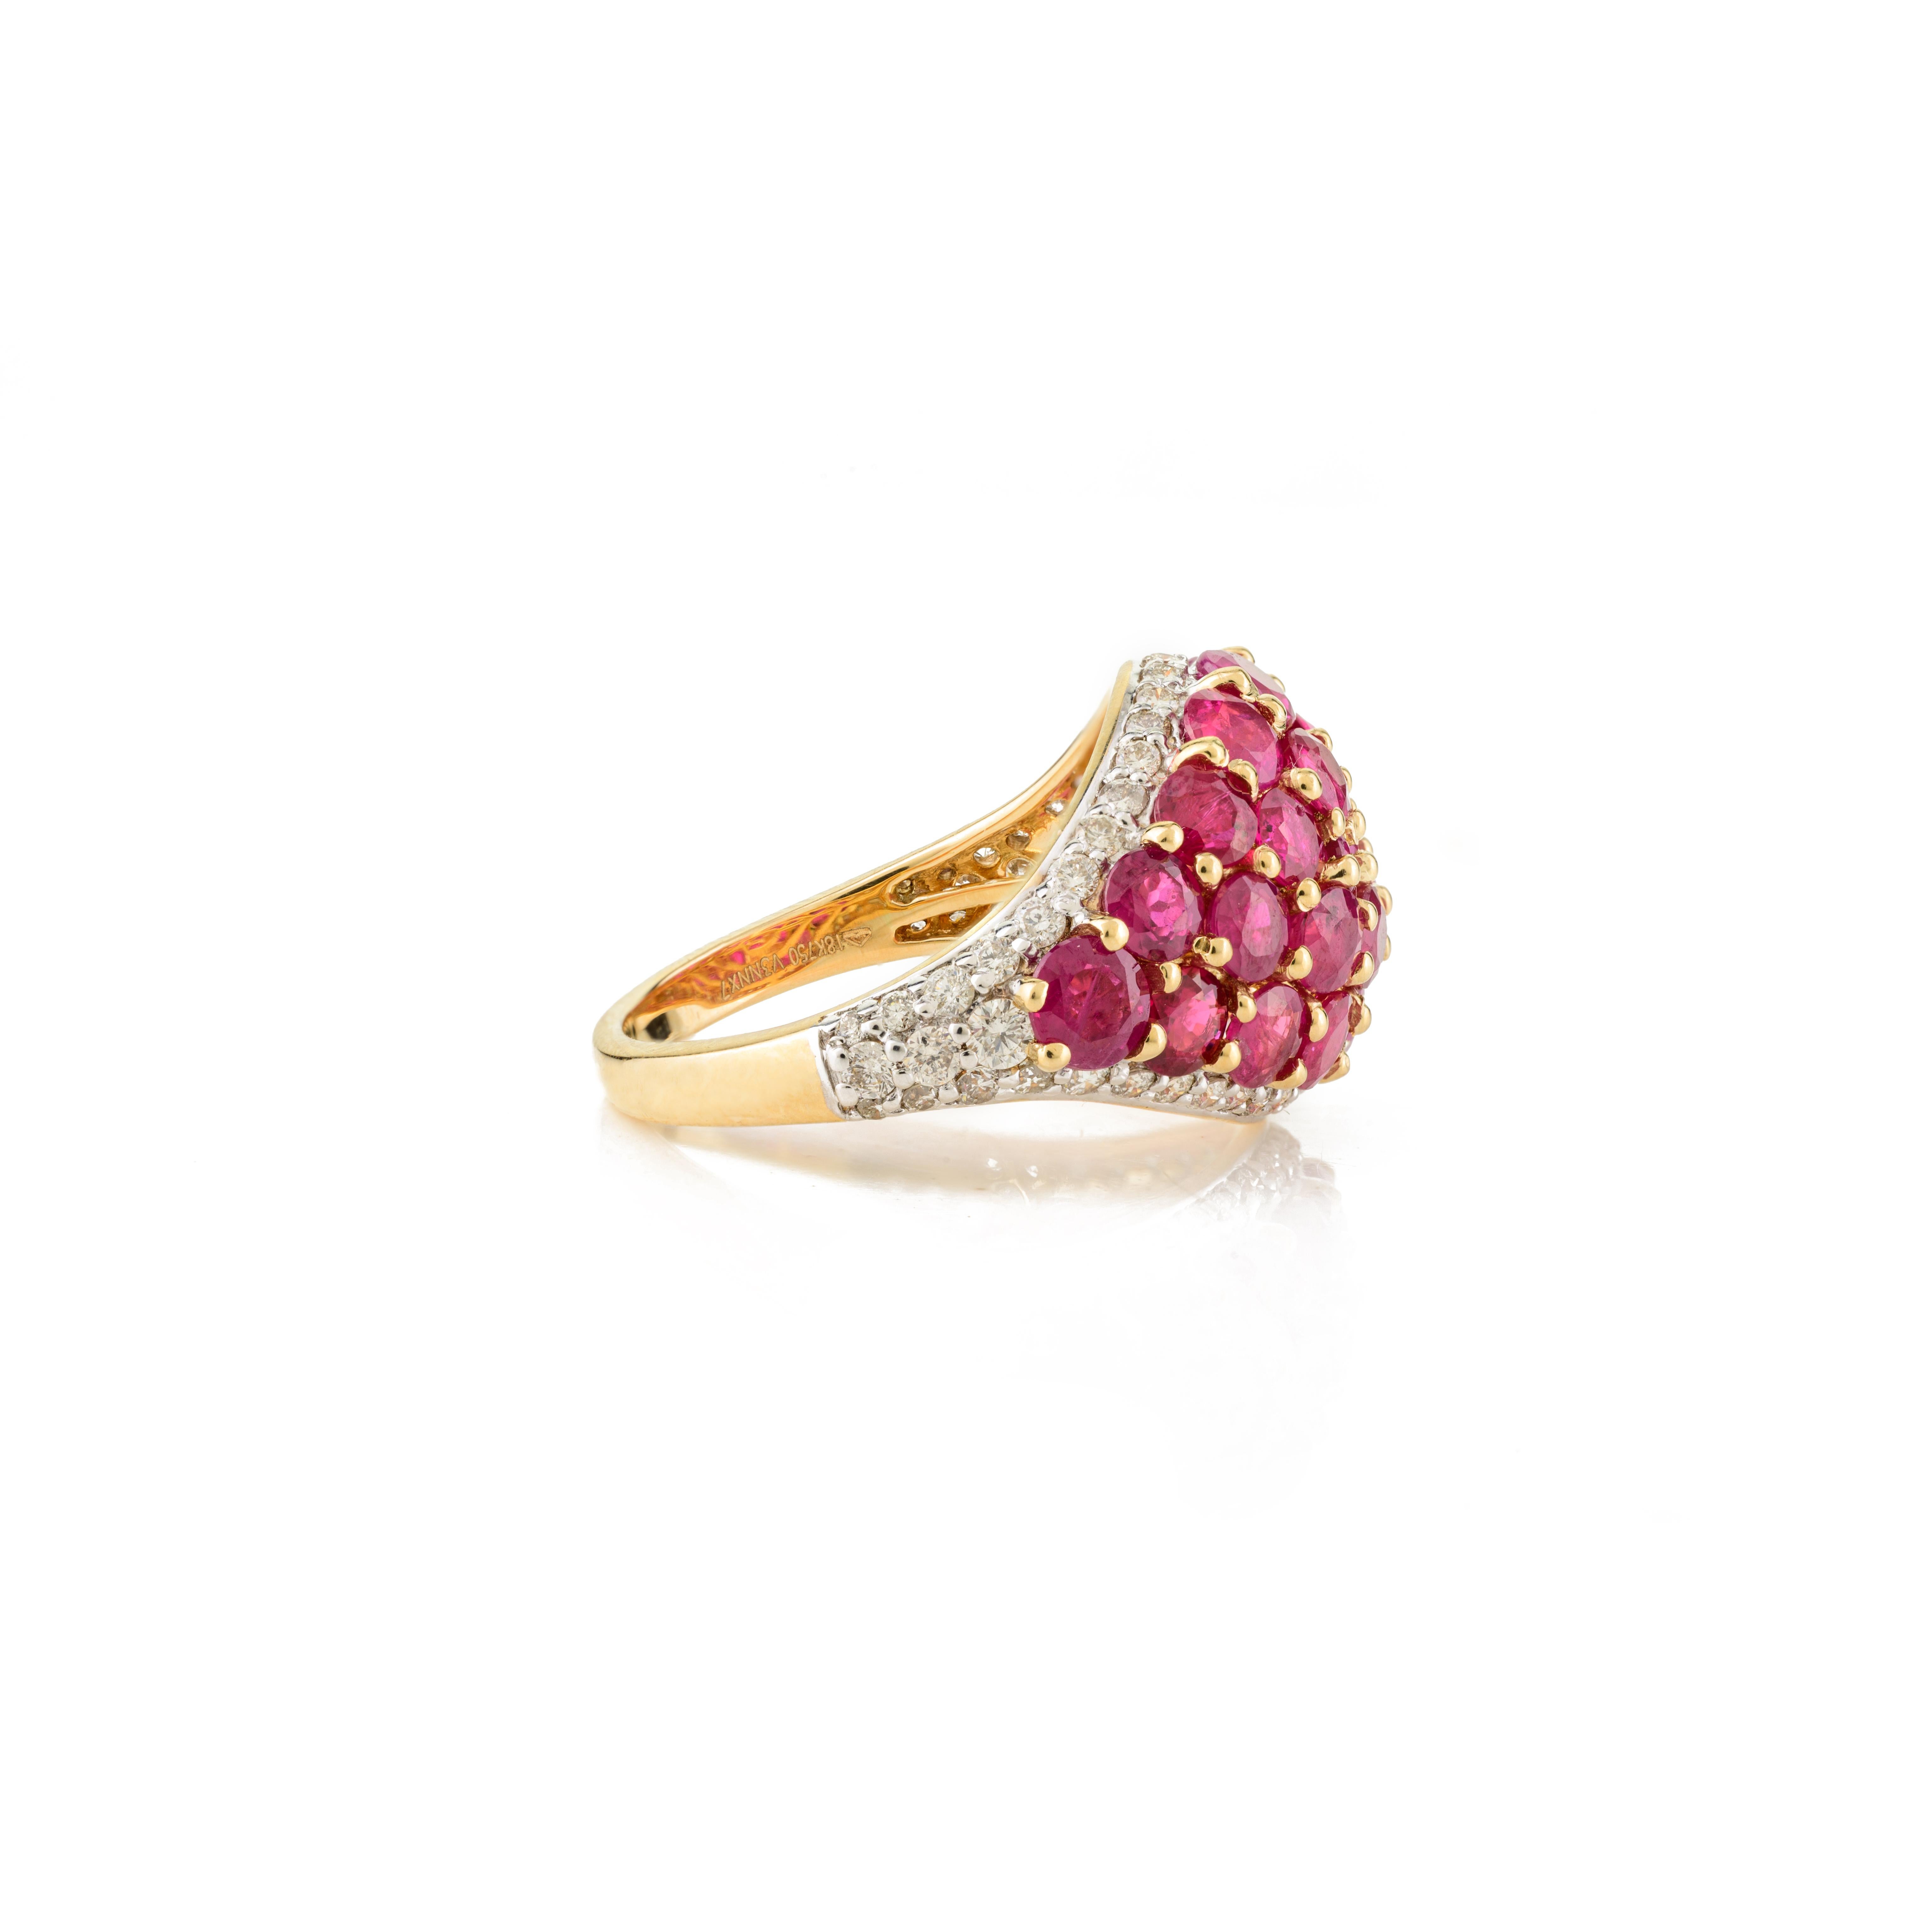 For Sale:  Natural Cluster Ruby and Diamond Wedding Ring in 18k Yellow Gold 5